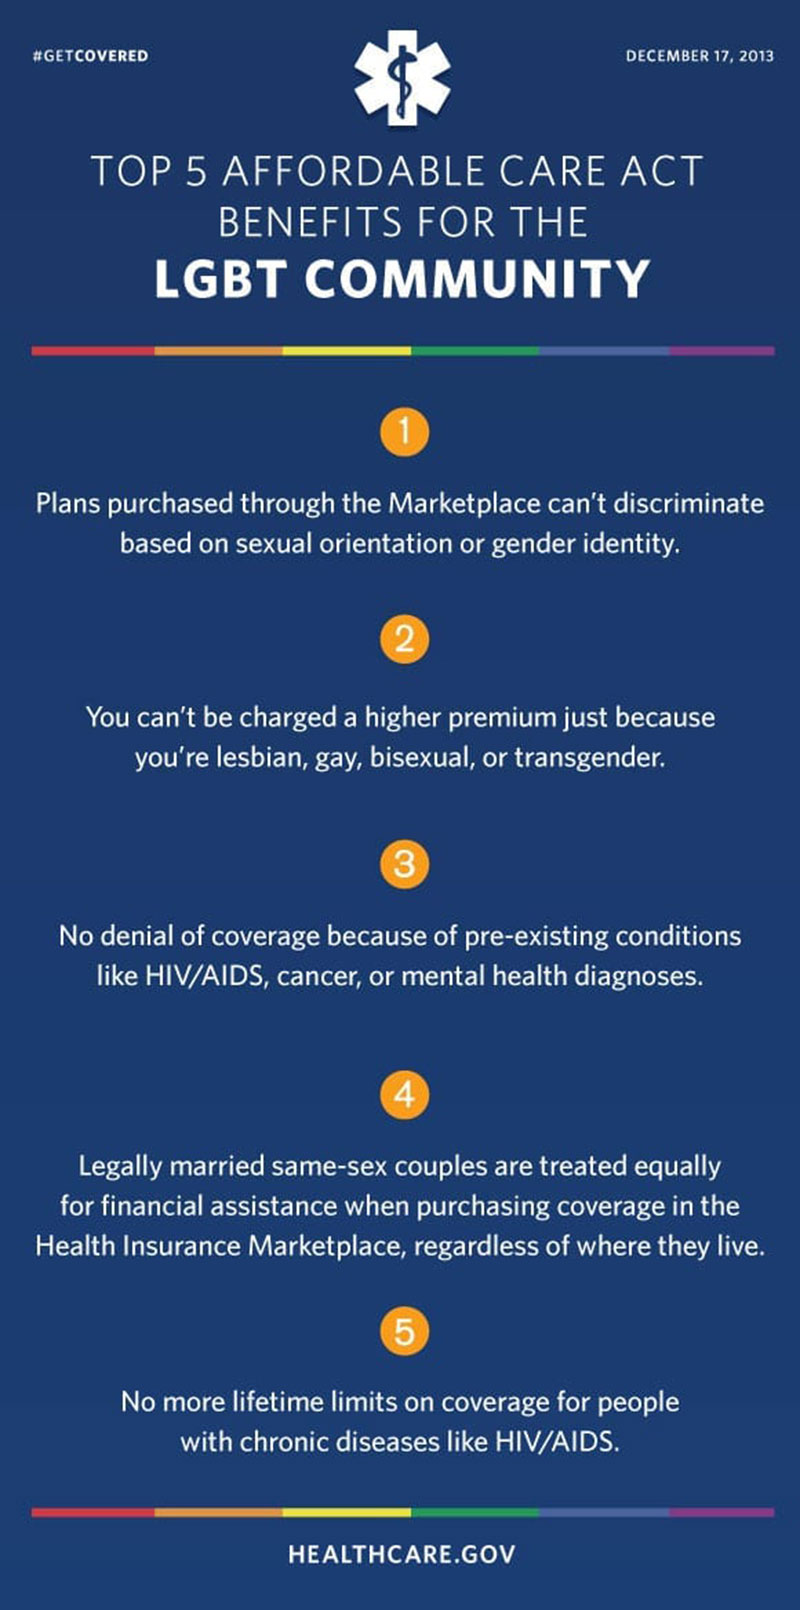 Top 5 Affordable Care Act Benefits for the LGBT Community. Photo:HealthCare.Gov